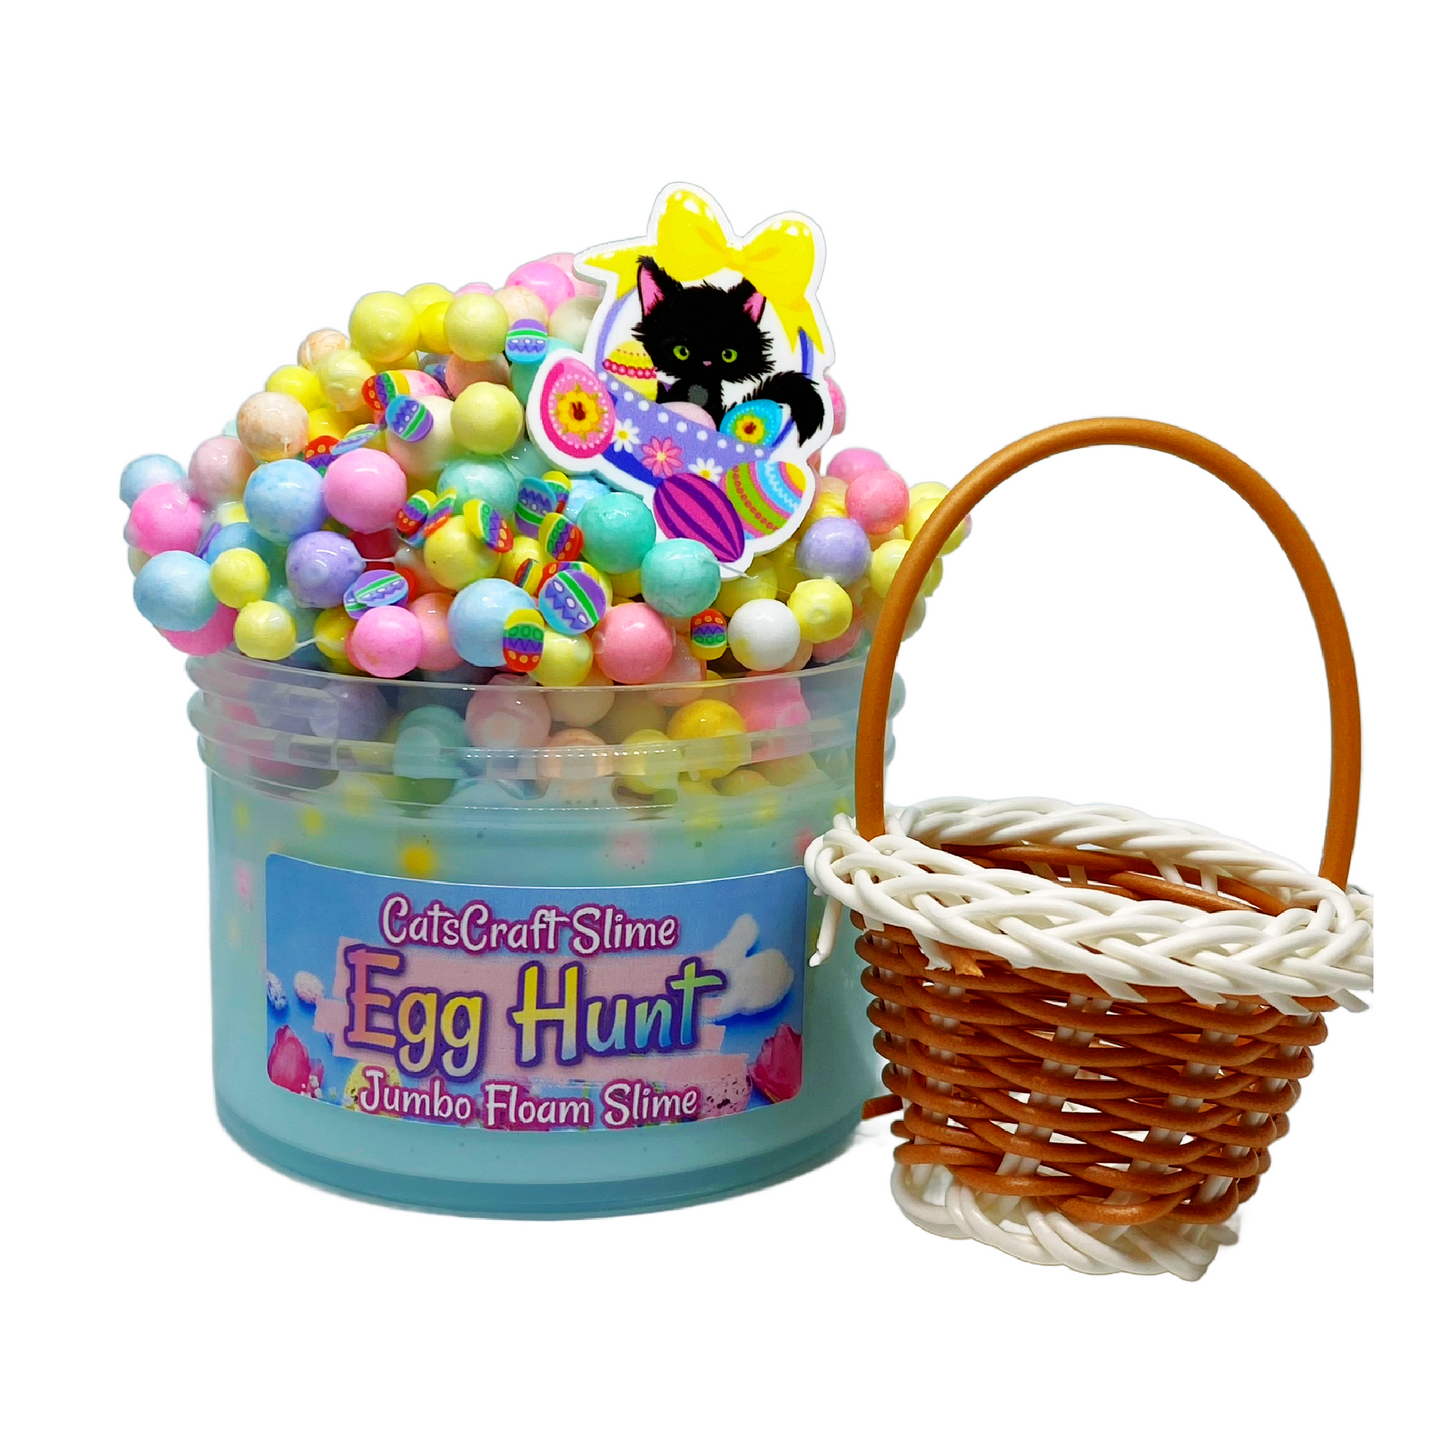 Jumbo Floam Slime "Egg Hunt" SCENTED Easter crunchy ASMR foam beads with mini Basket and charm